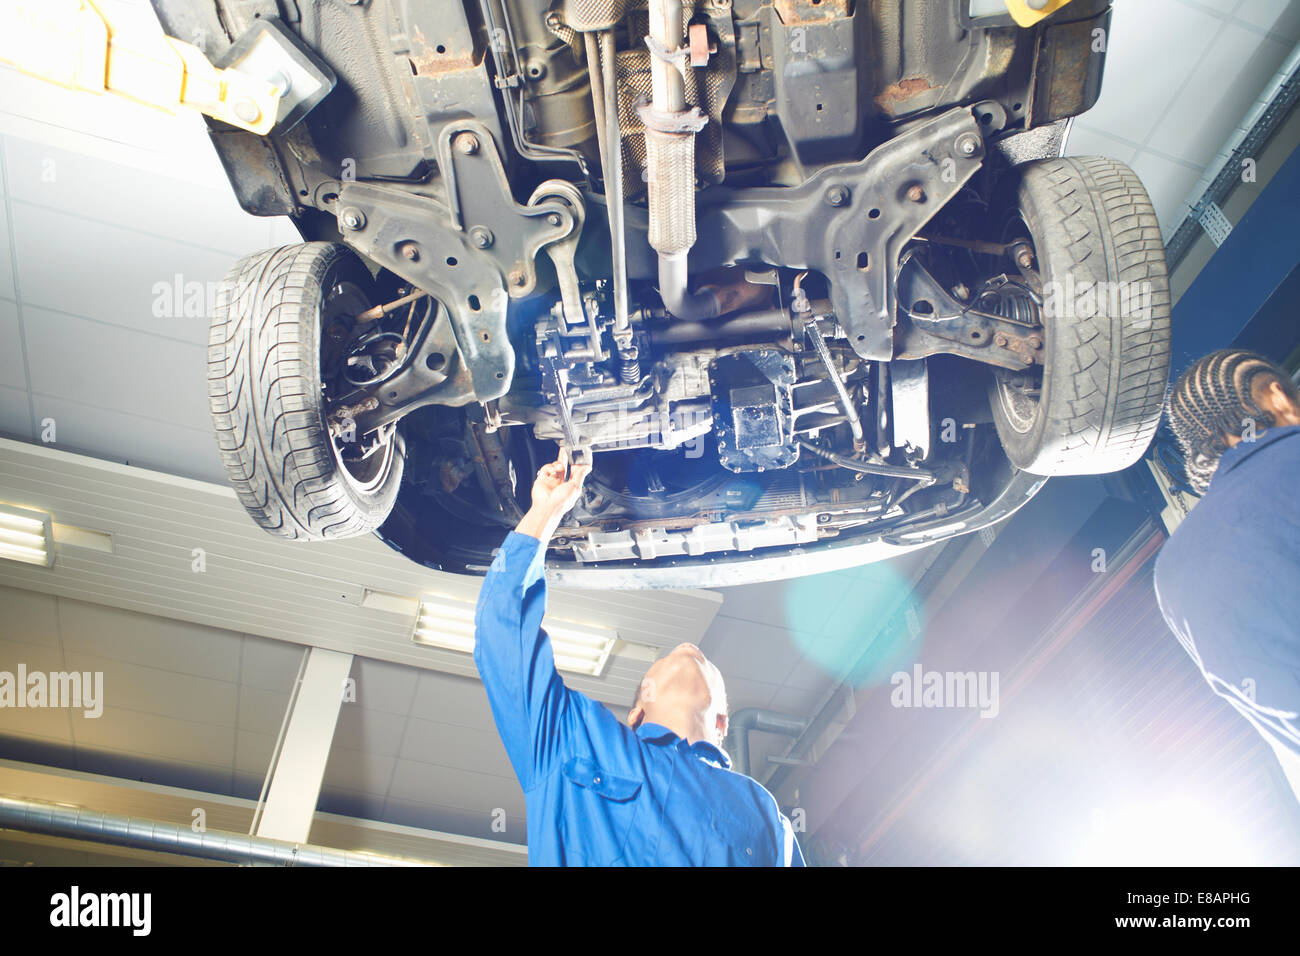 Male college student looking up at car in garage workshop Stock Photo